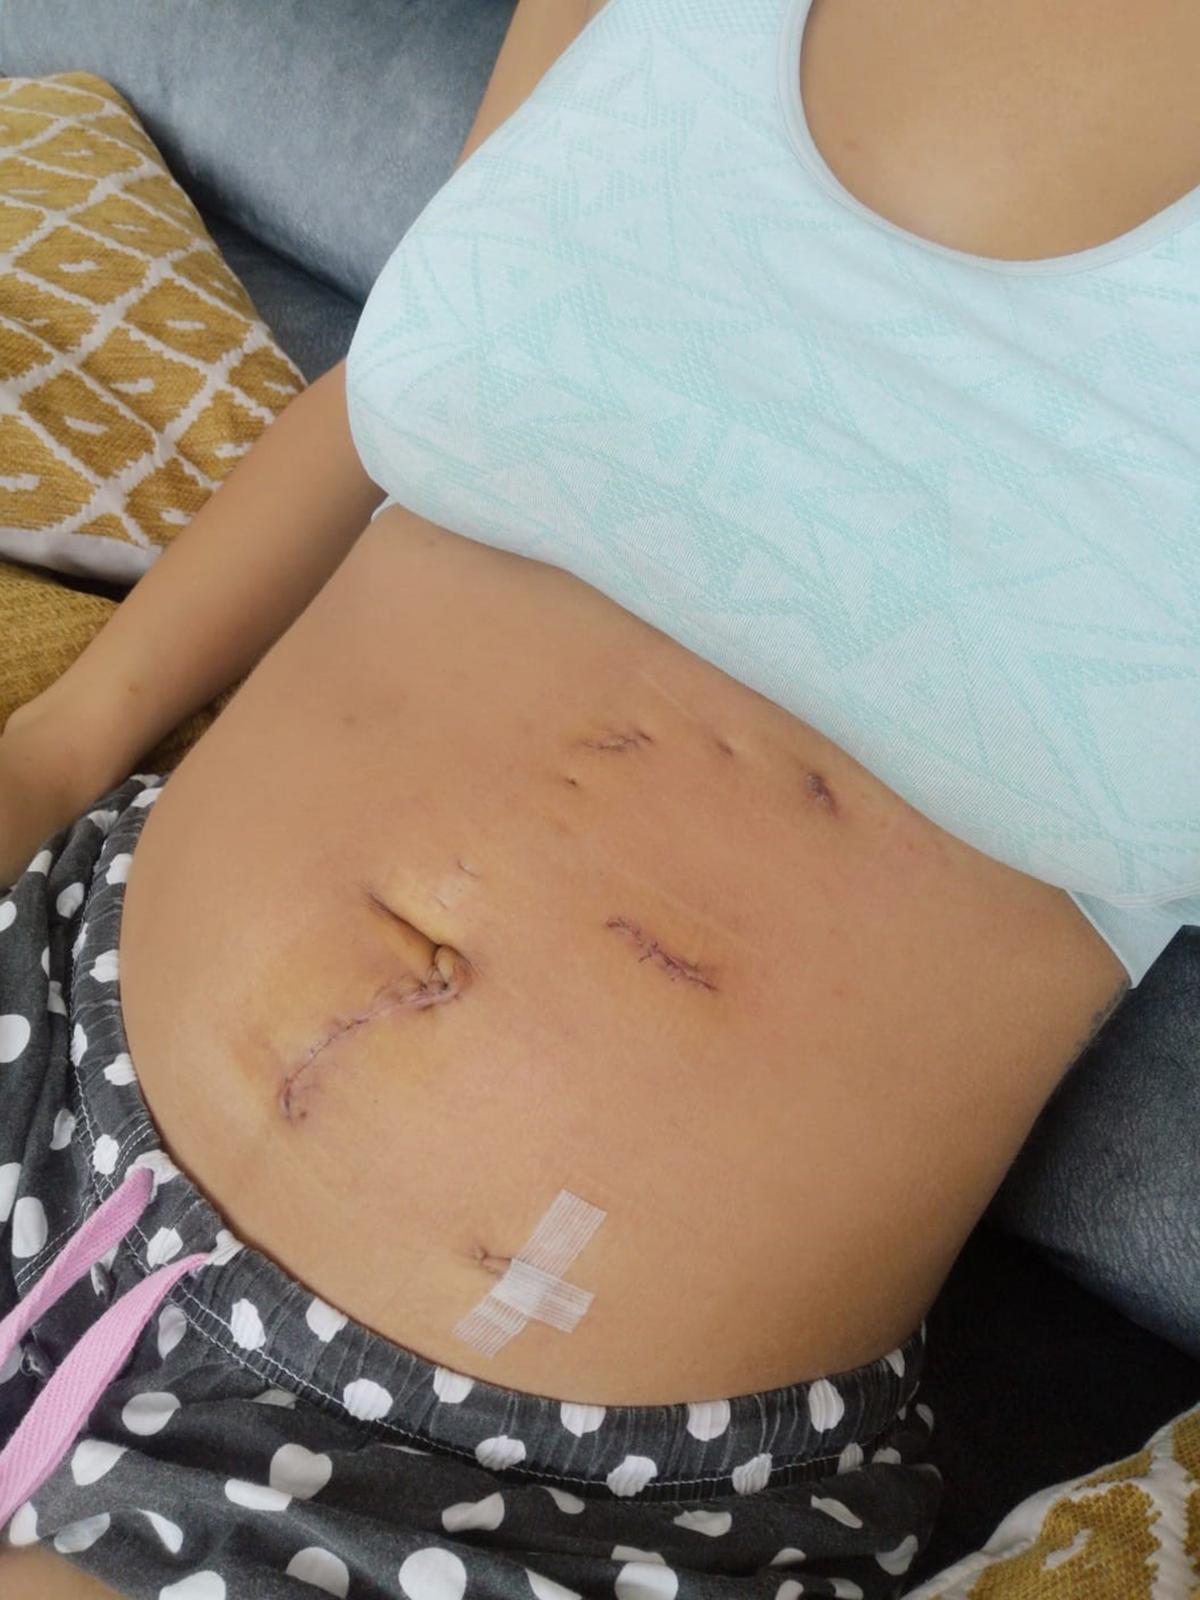 Rachel's scars after kidney surgery. (Caters News)